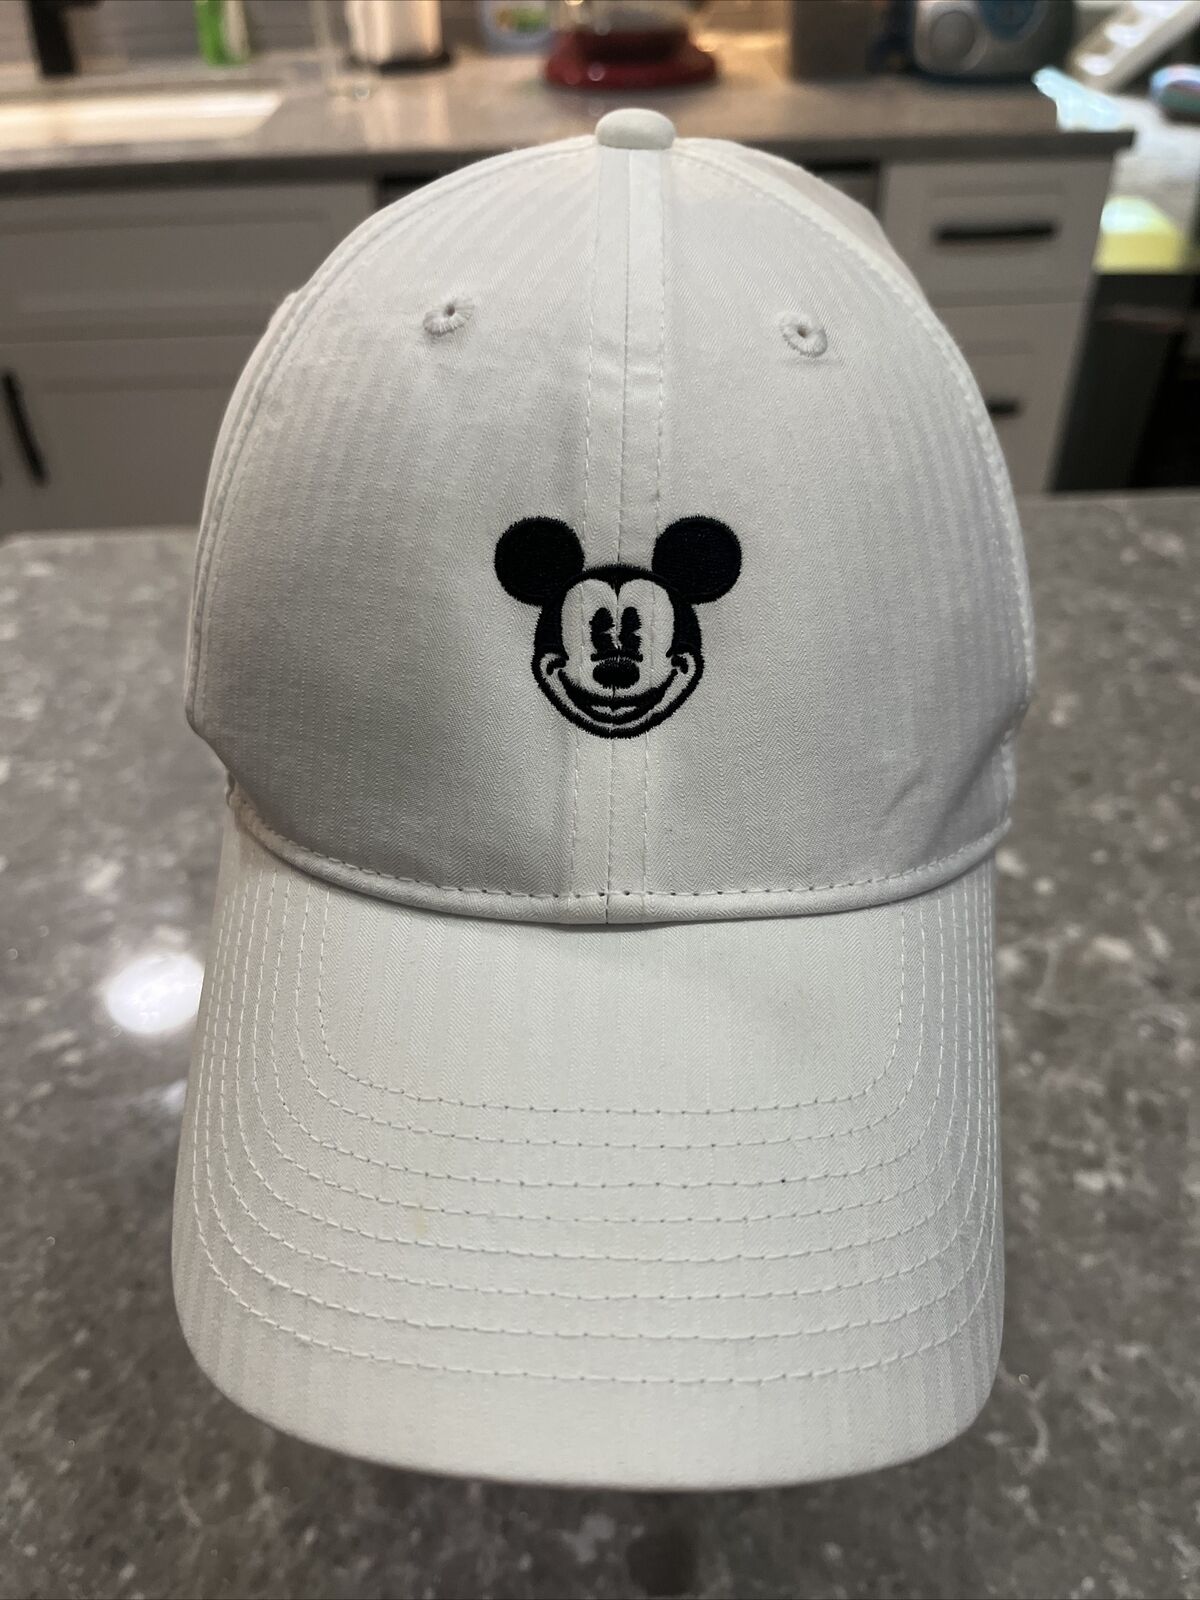 Disney Nike Legacy91 Golf Hat Cap White Dri-Fit Mickey Mouse Adult Adjustable